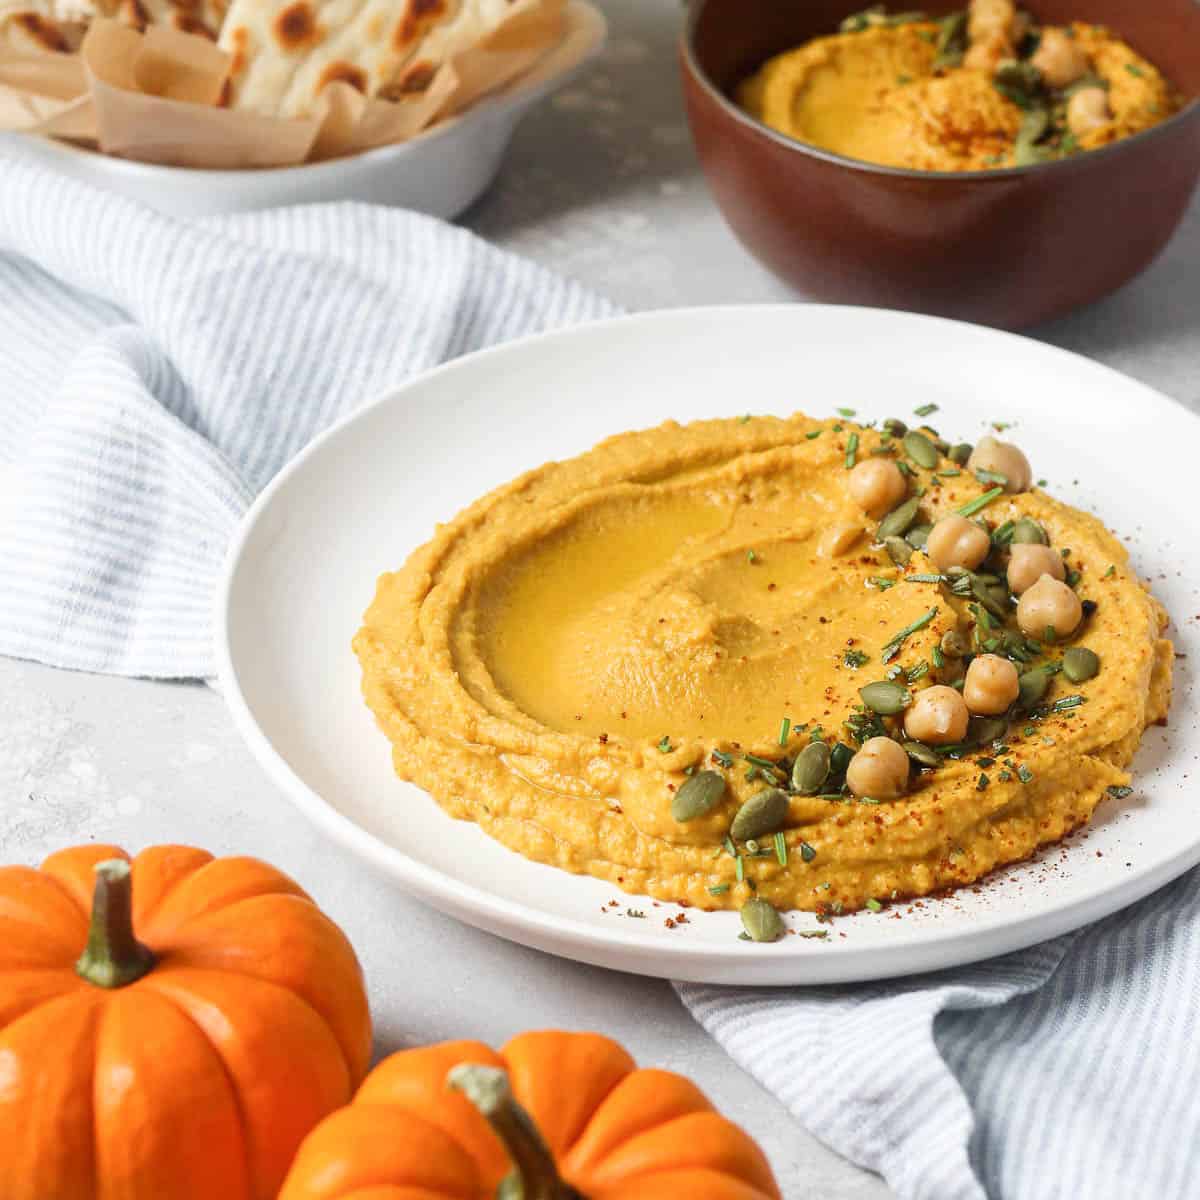 Pumpkin hummus on white plate with chick peas.